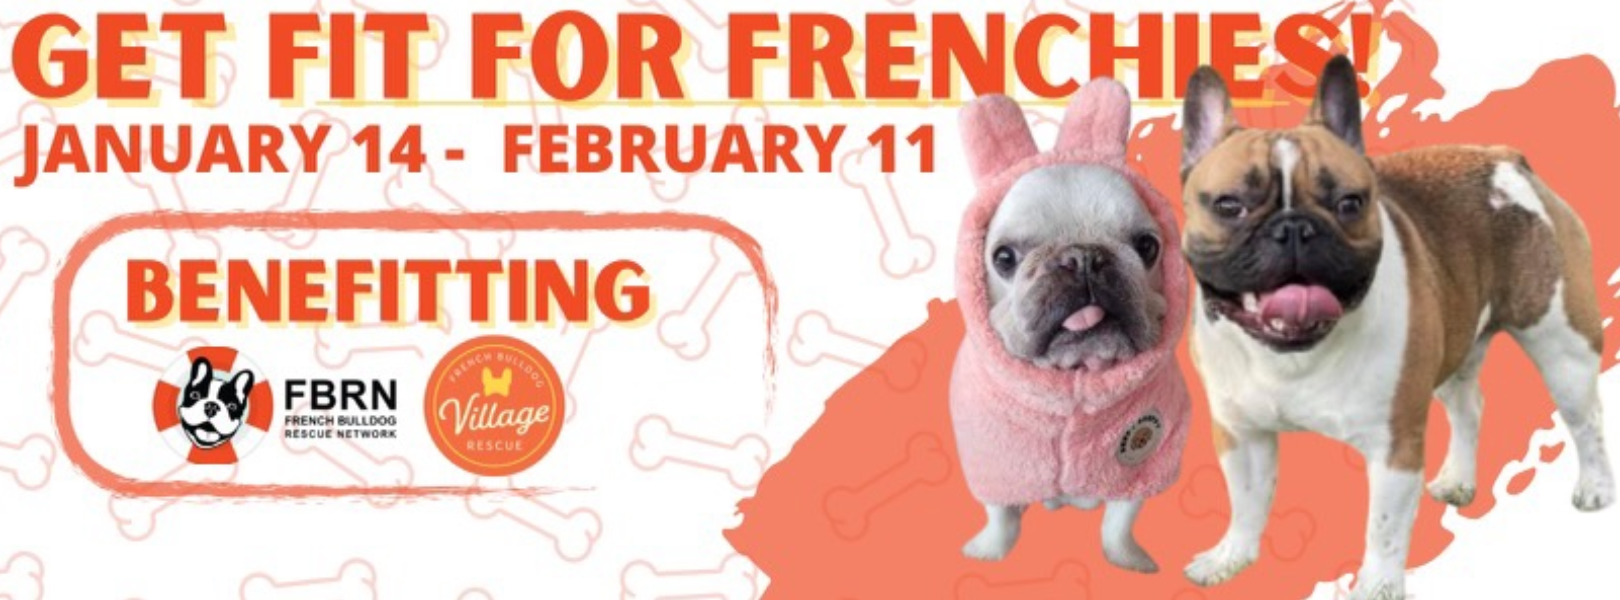 Get Fit For Frenchies